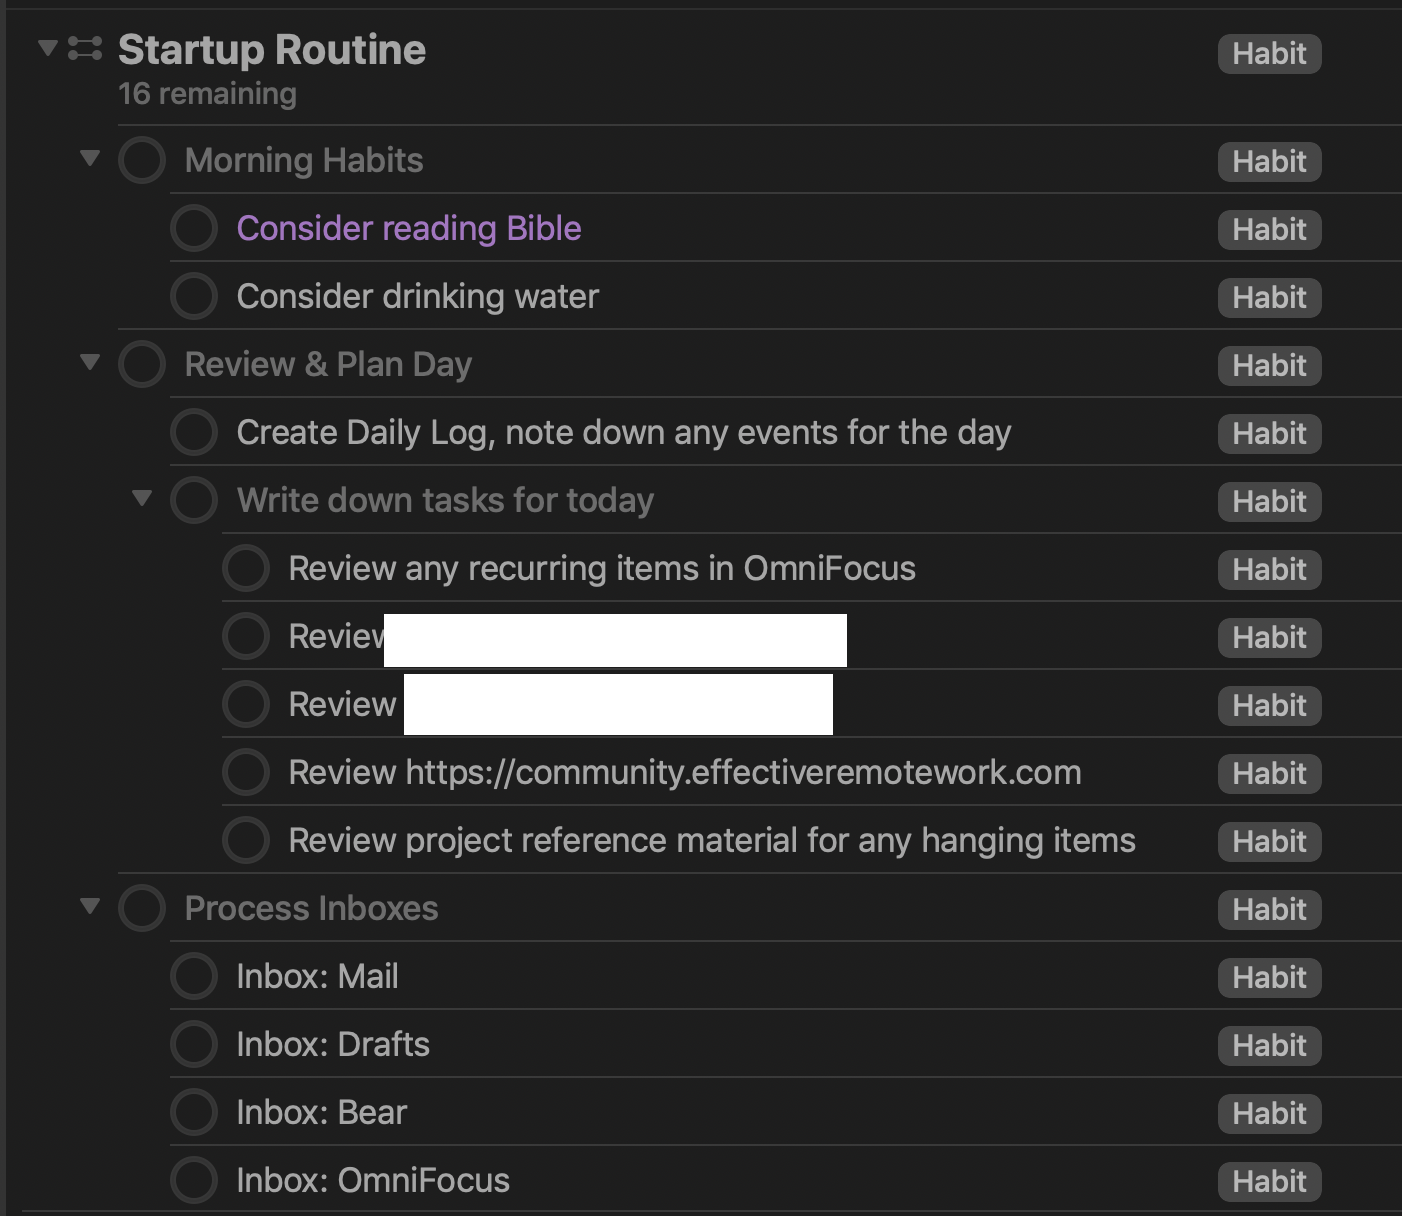 Screenshot showing the Startup Routine project.